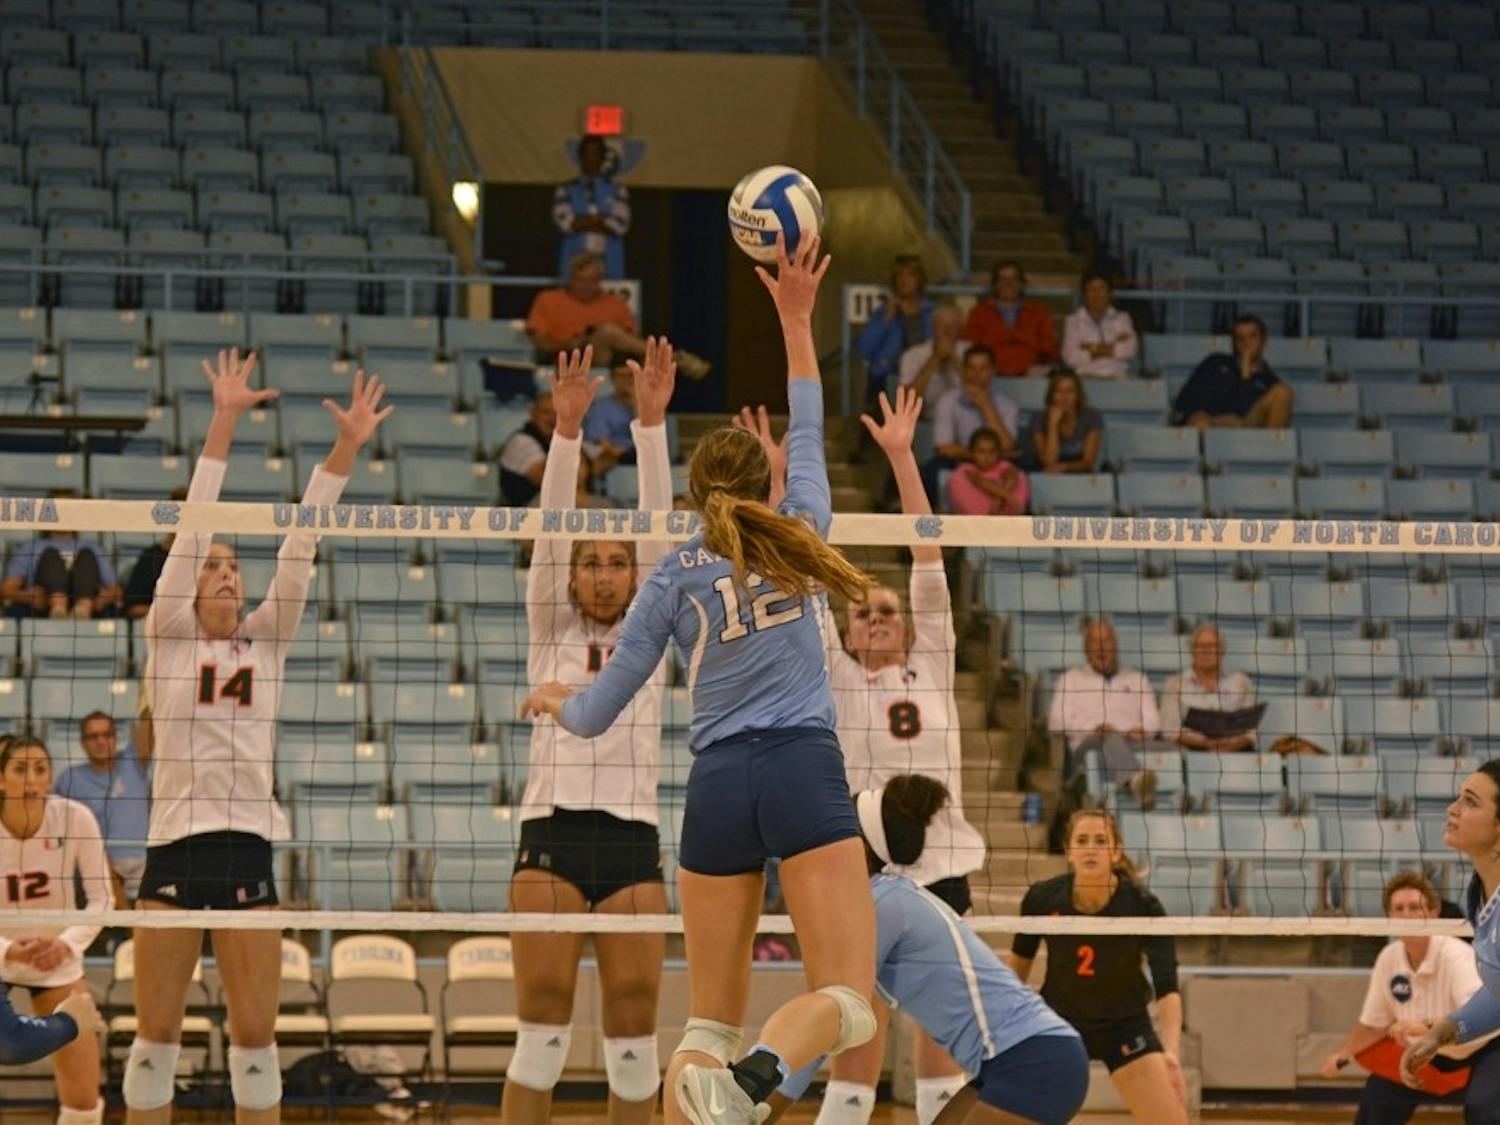 Julia Scoles (12) attacks against Miami during her first-year campaign in October 2016.